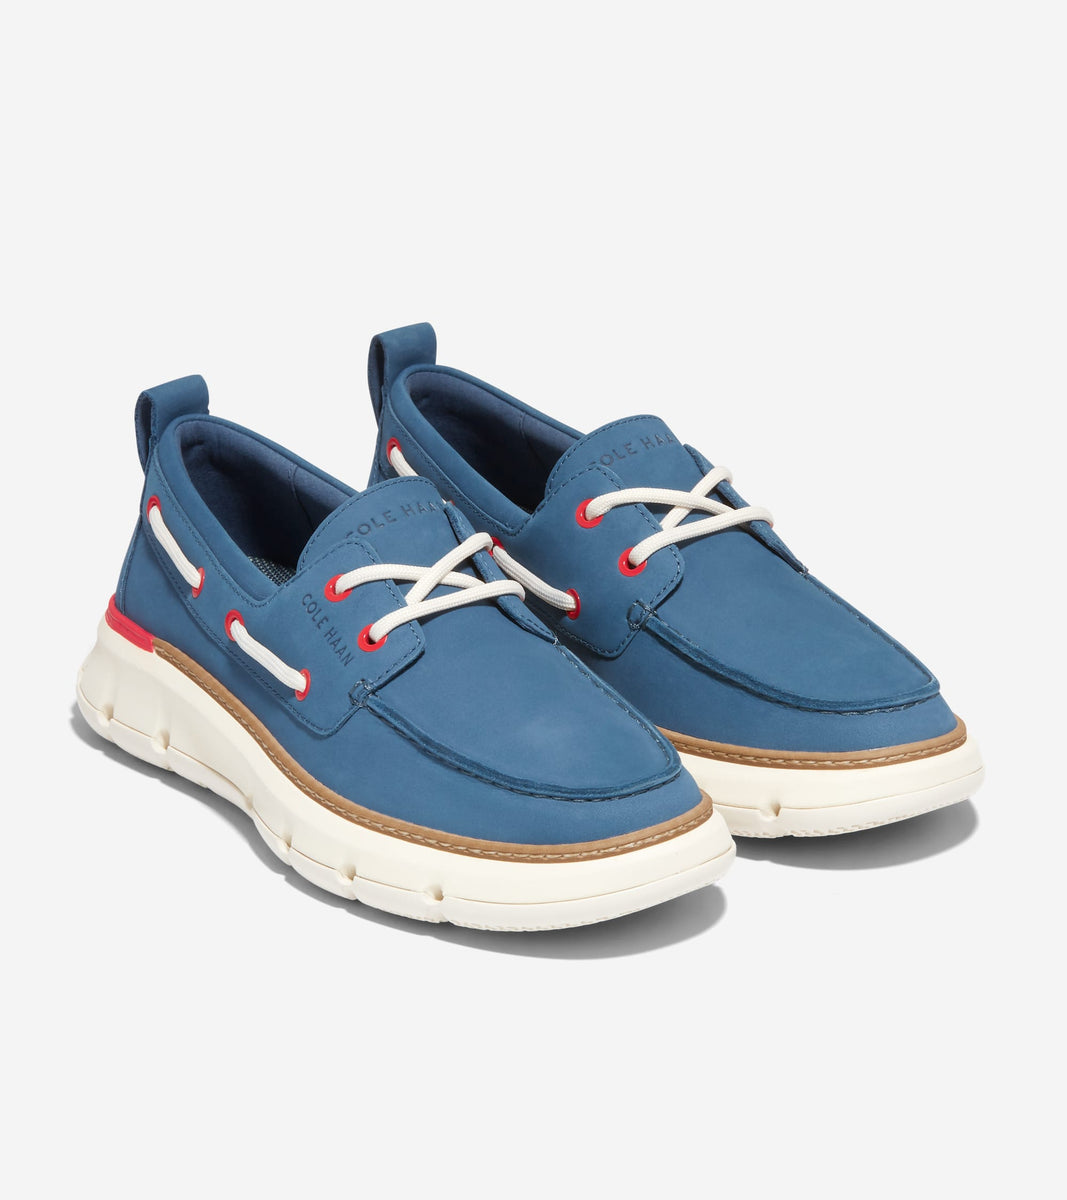 W28991:ENSIGN BLUE/FIERY RED/IVORY